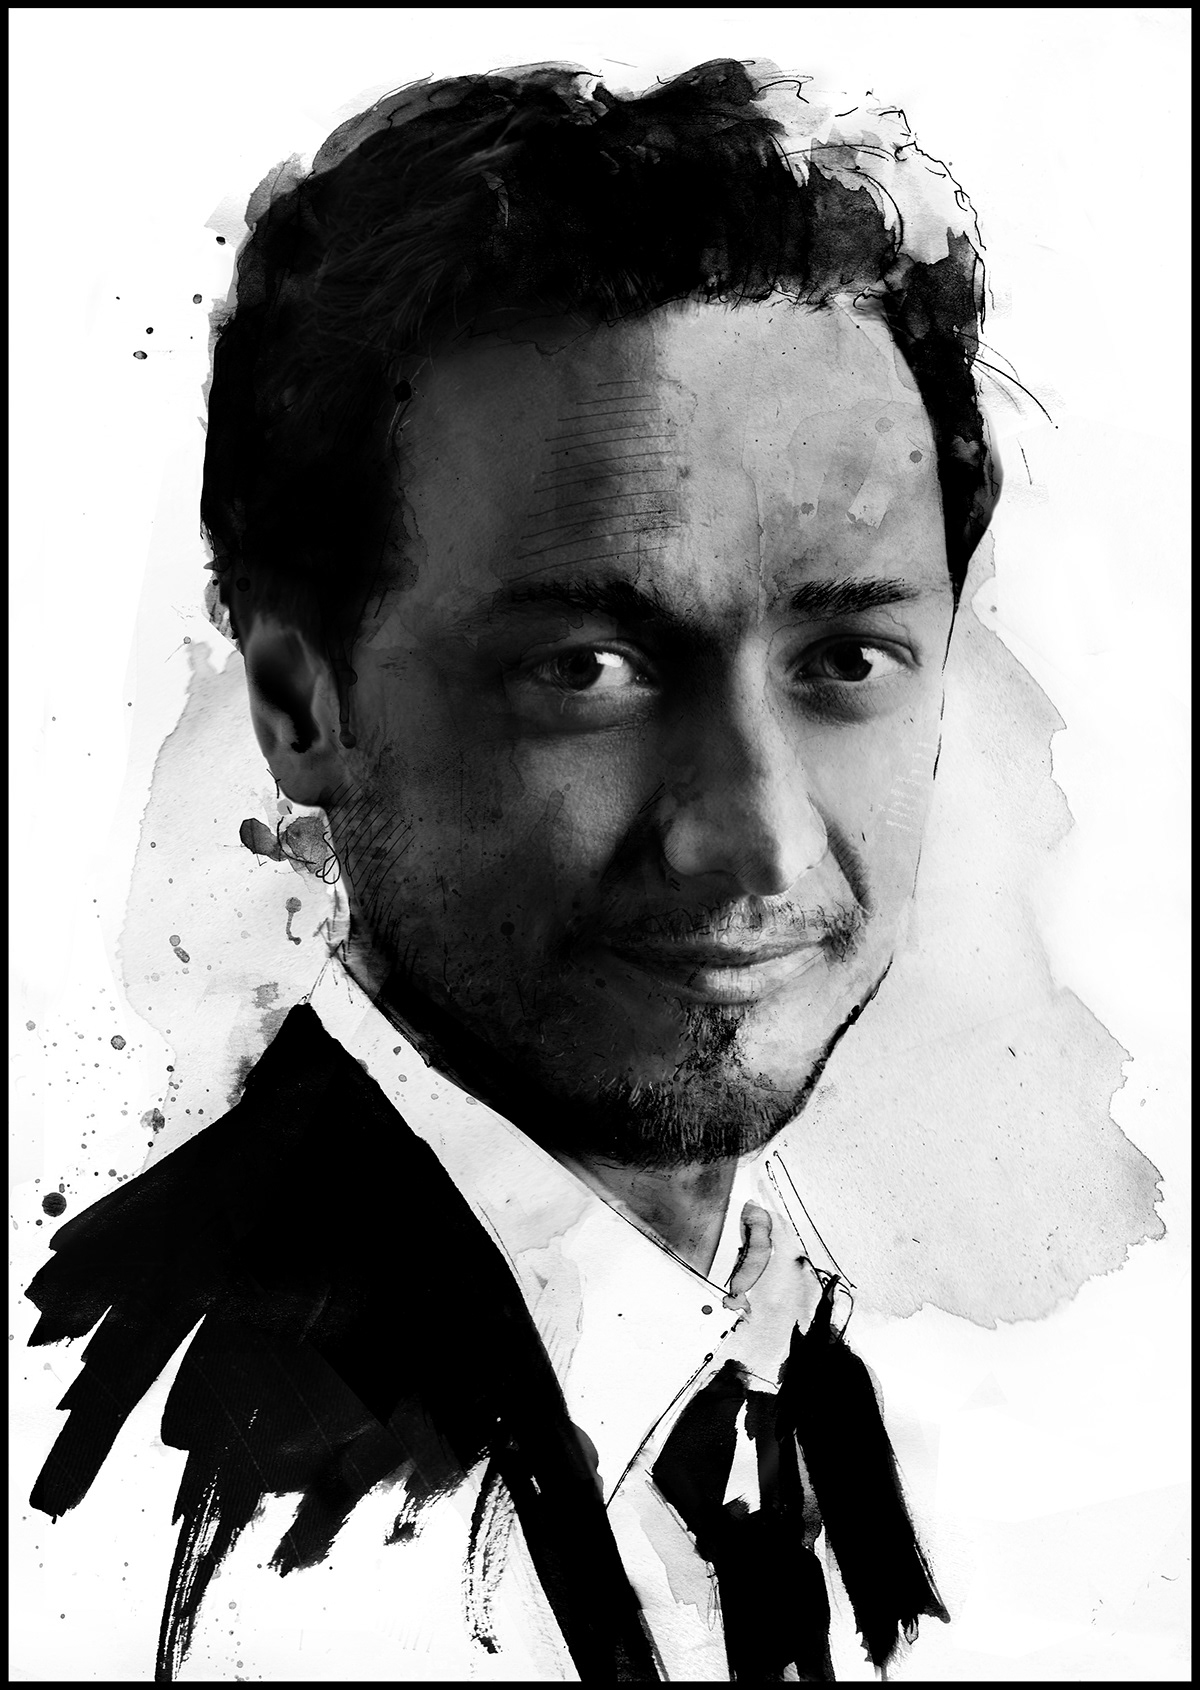 ink Squid watercolour tradigital portrait black and white famous illustrations digital mixed media robert downey jr james mcavoy